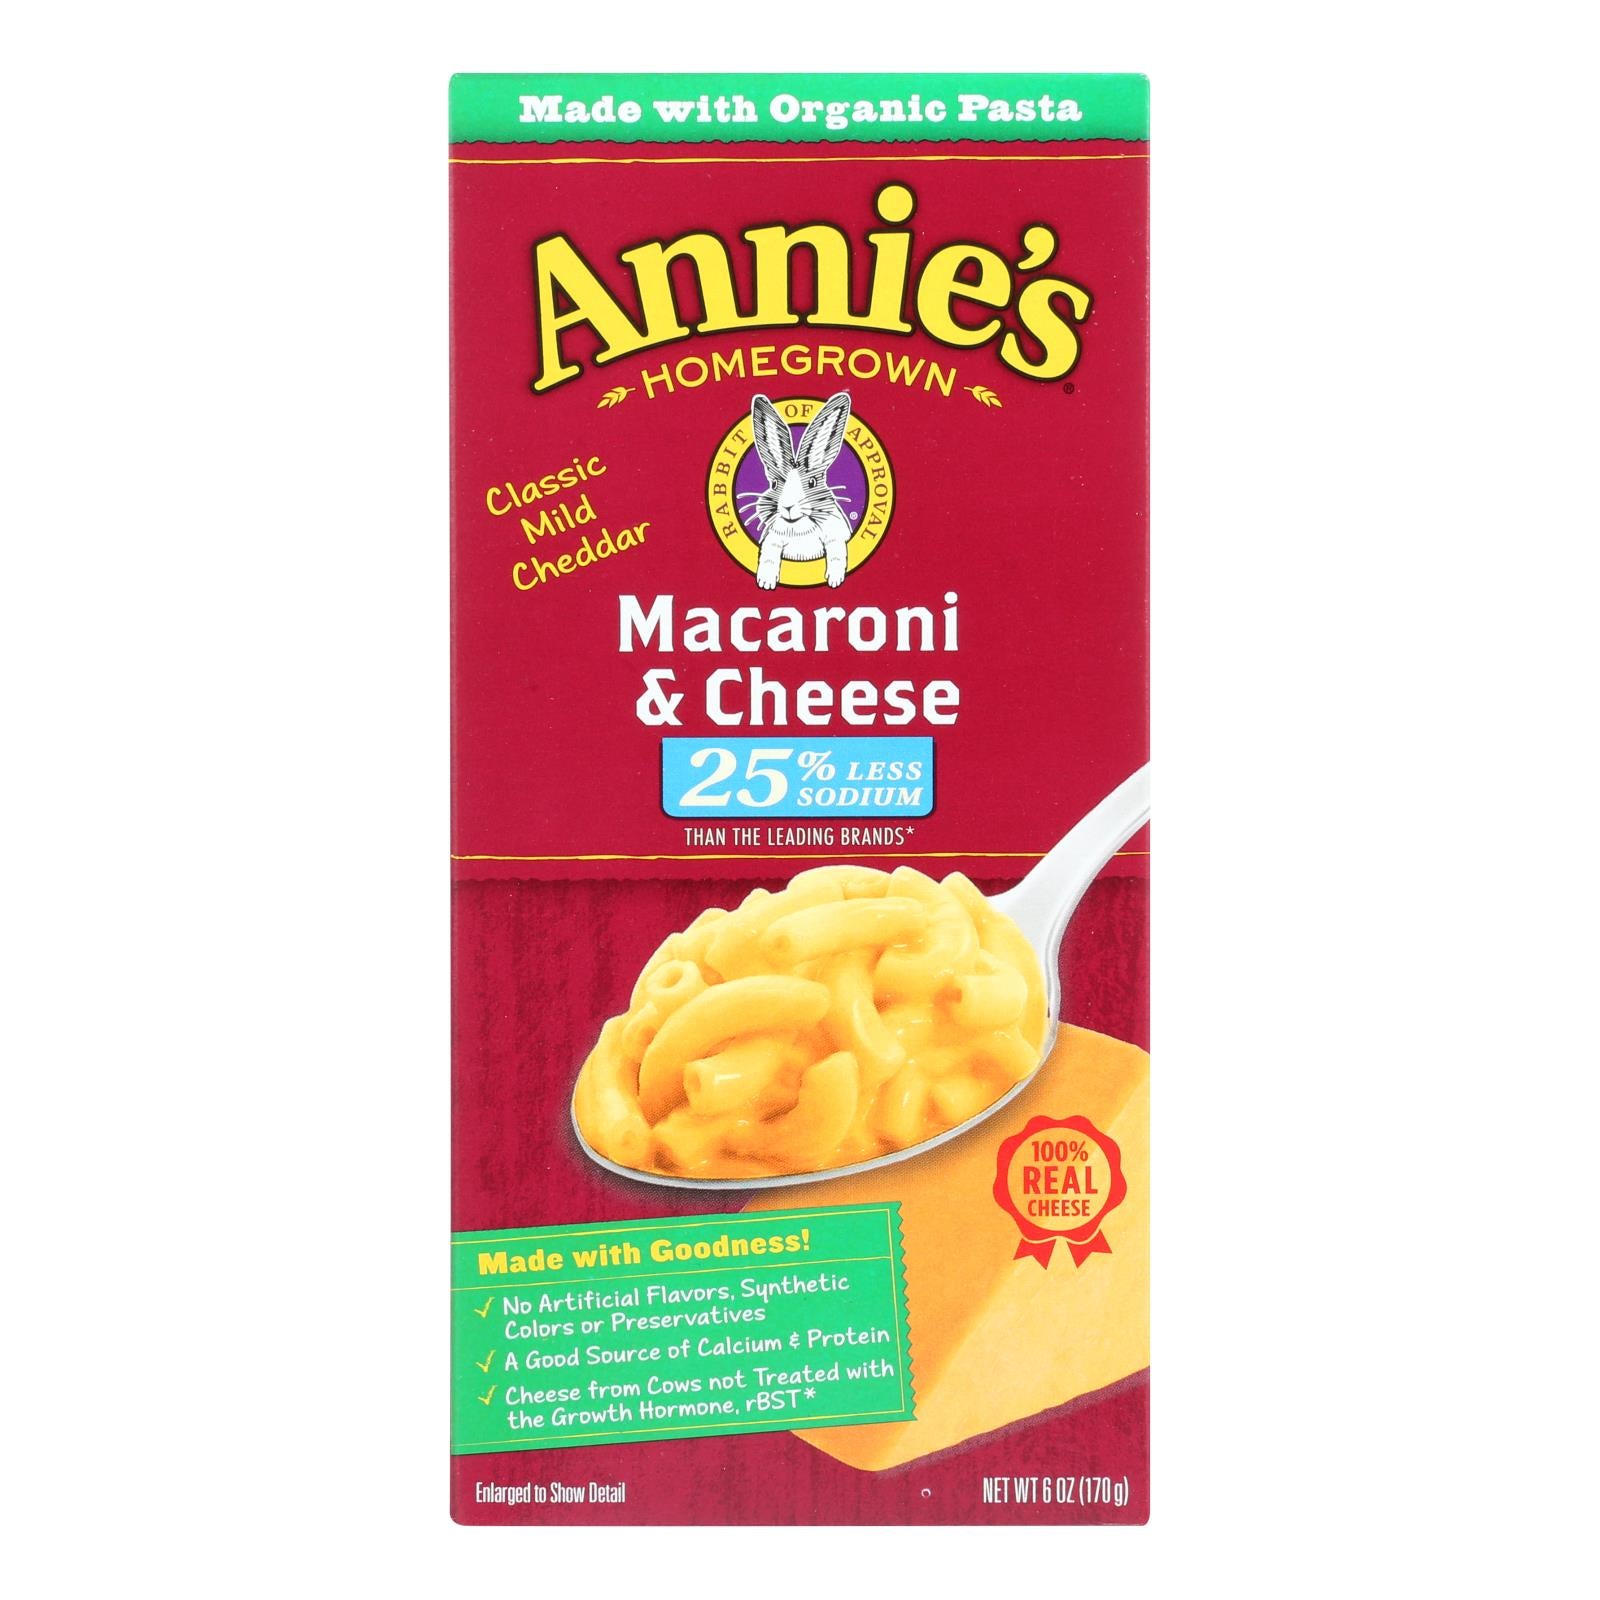 Annie'S Homegrown, Annie's Homegrown Low Sodium Macaroni and Cheese - Case of 12 - 6 oz. (Pack of 12)